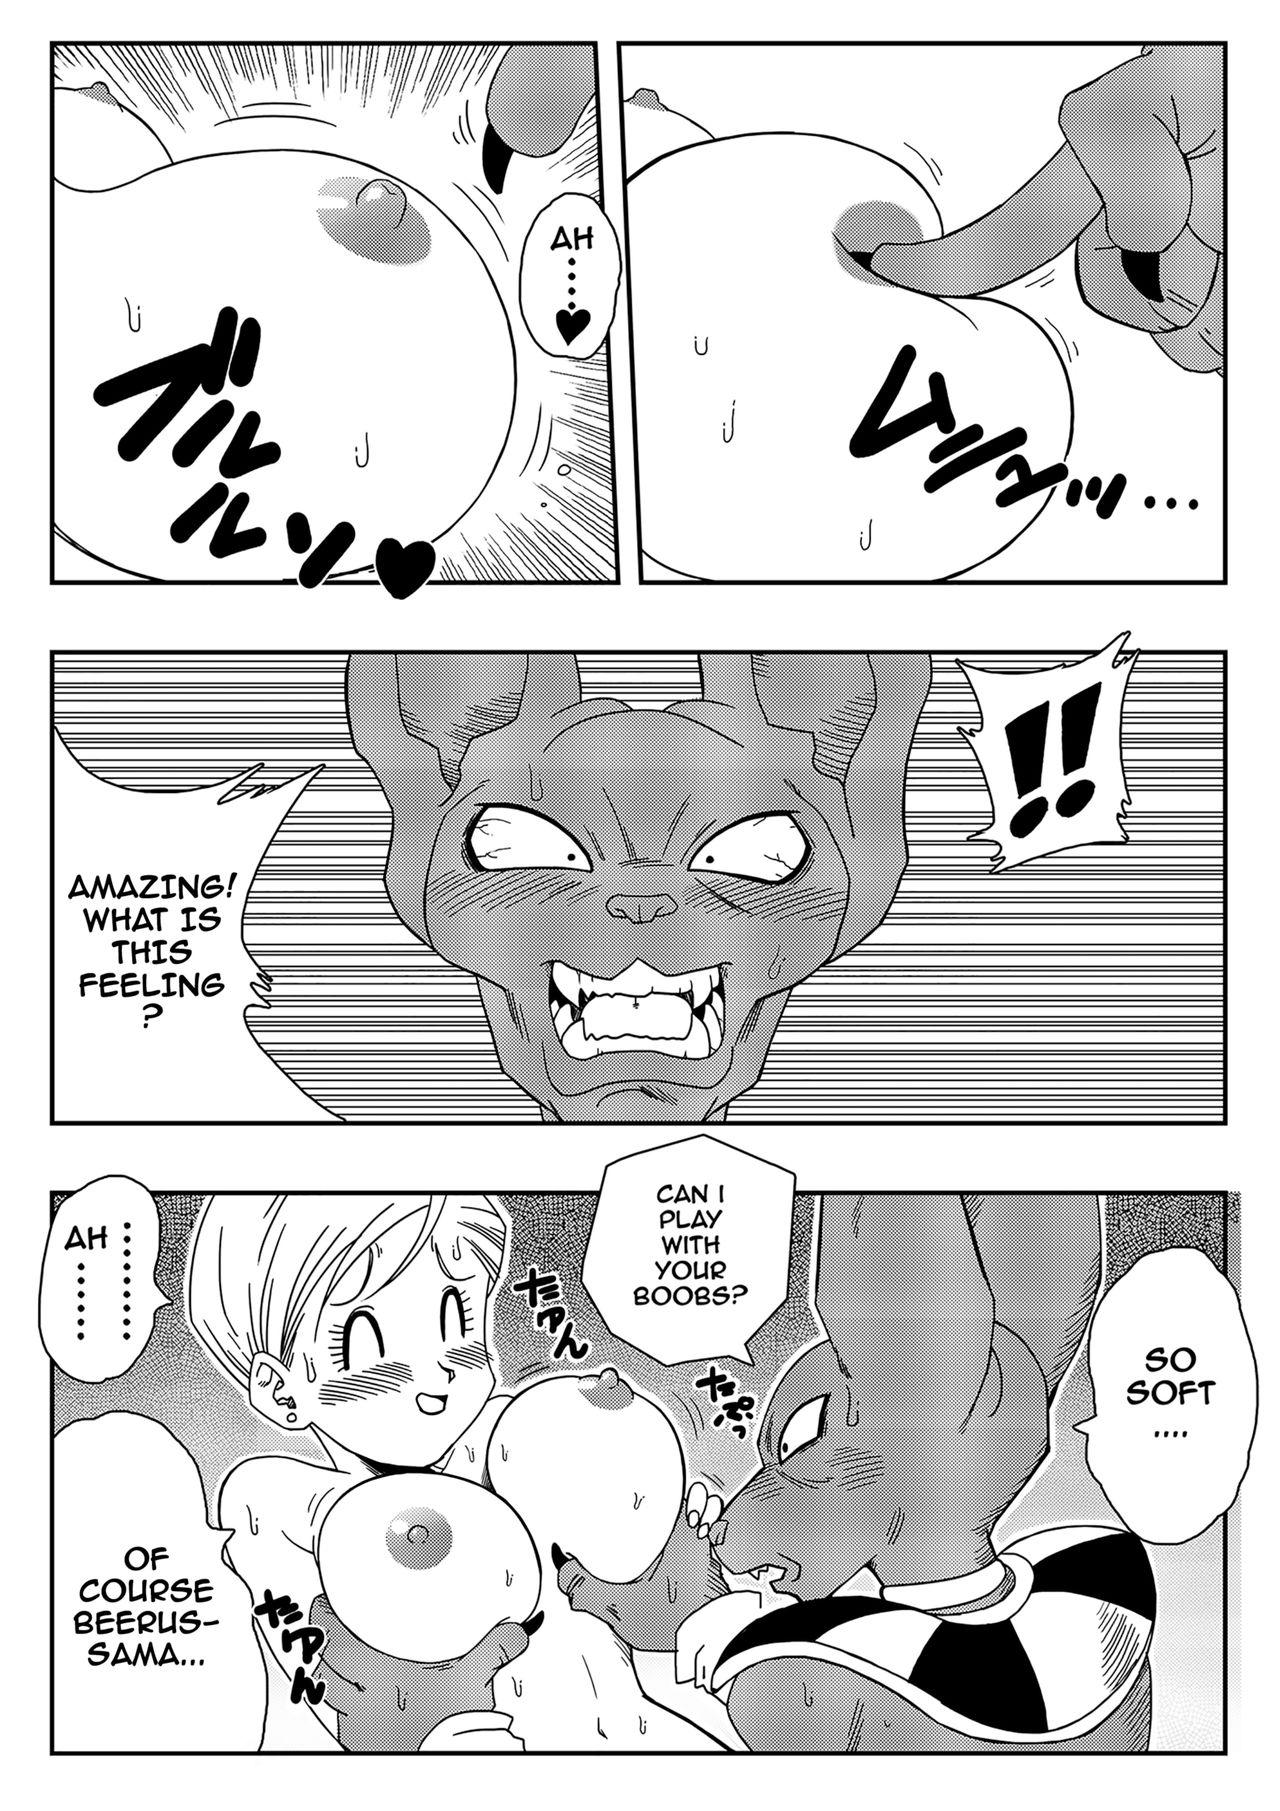 Stripper Bulma Saves The Earth! - Dragon ball Mommy - Page 7